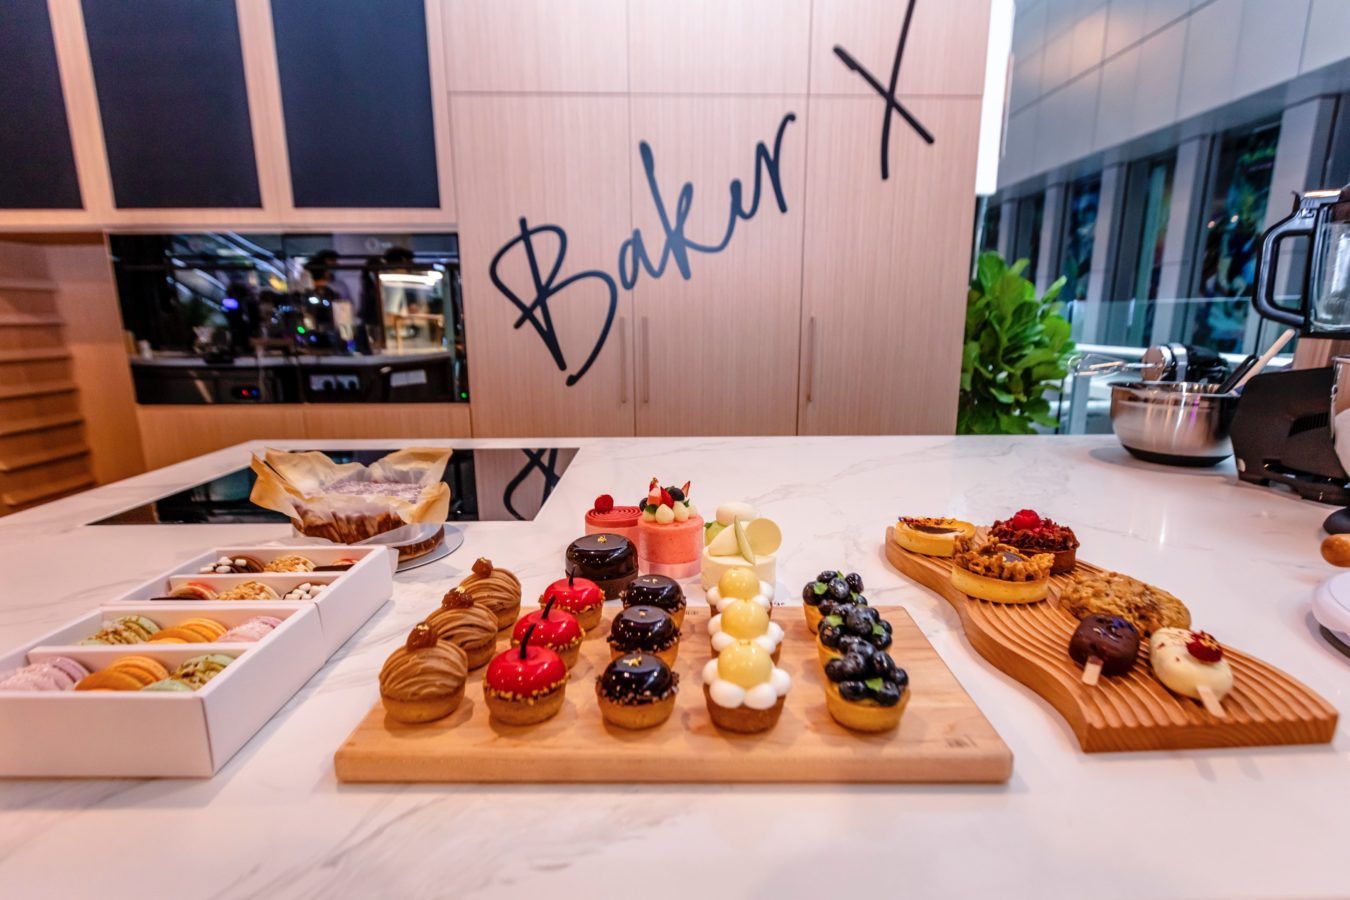 Baker X at Orchard Central spotlights creations by home bakers